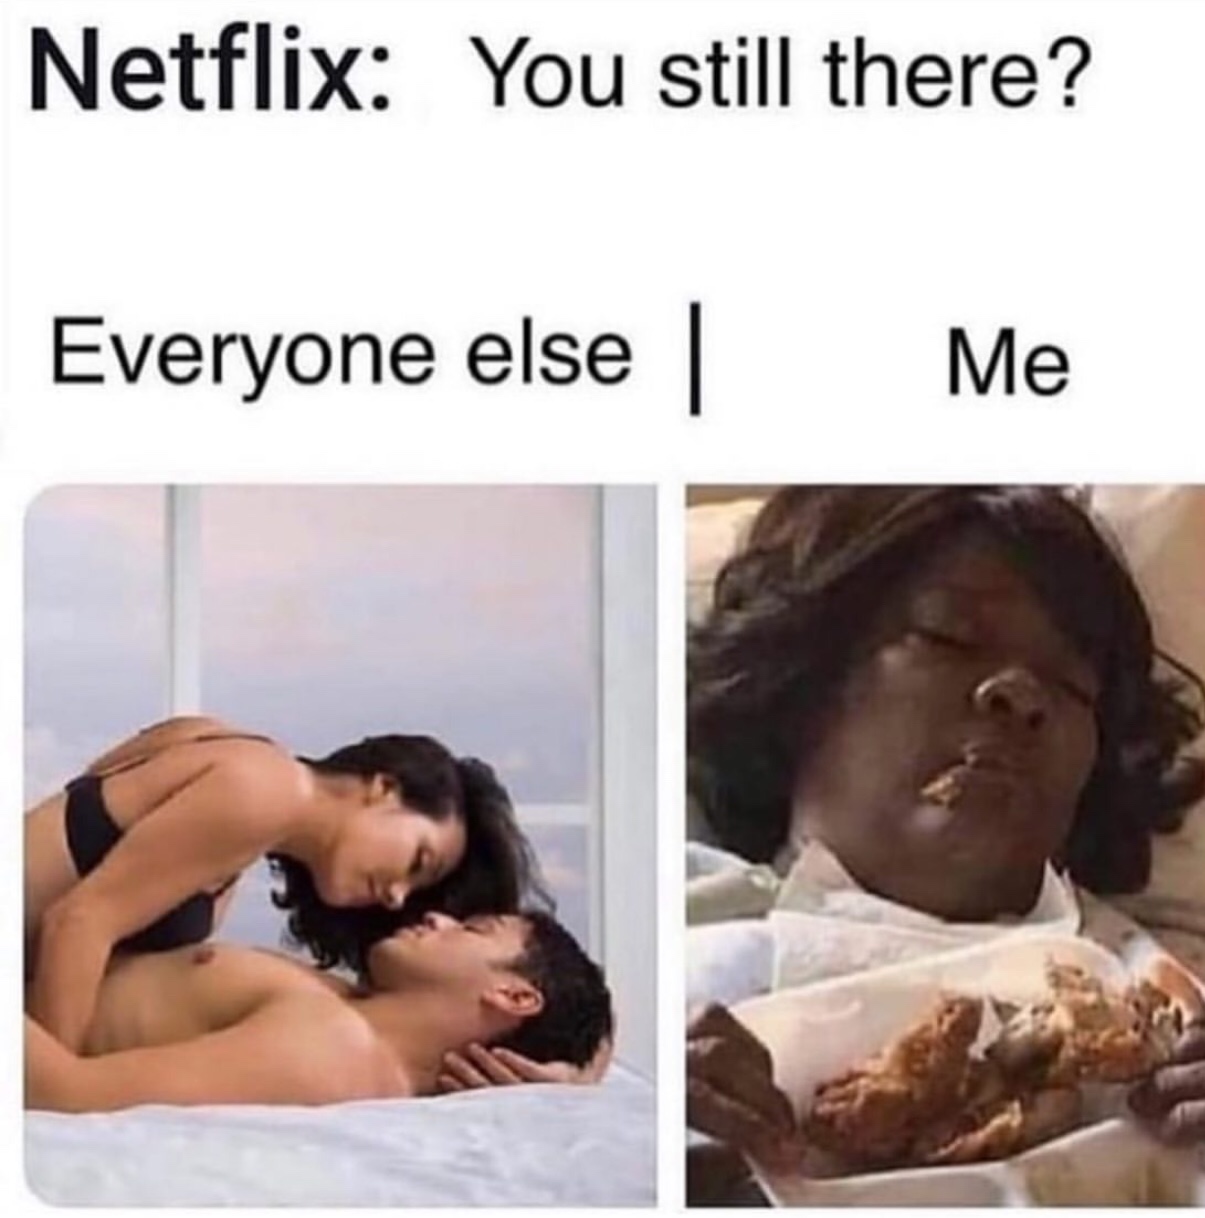 netflix you still there meme - Netflix You still there? Everyone else | Me